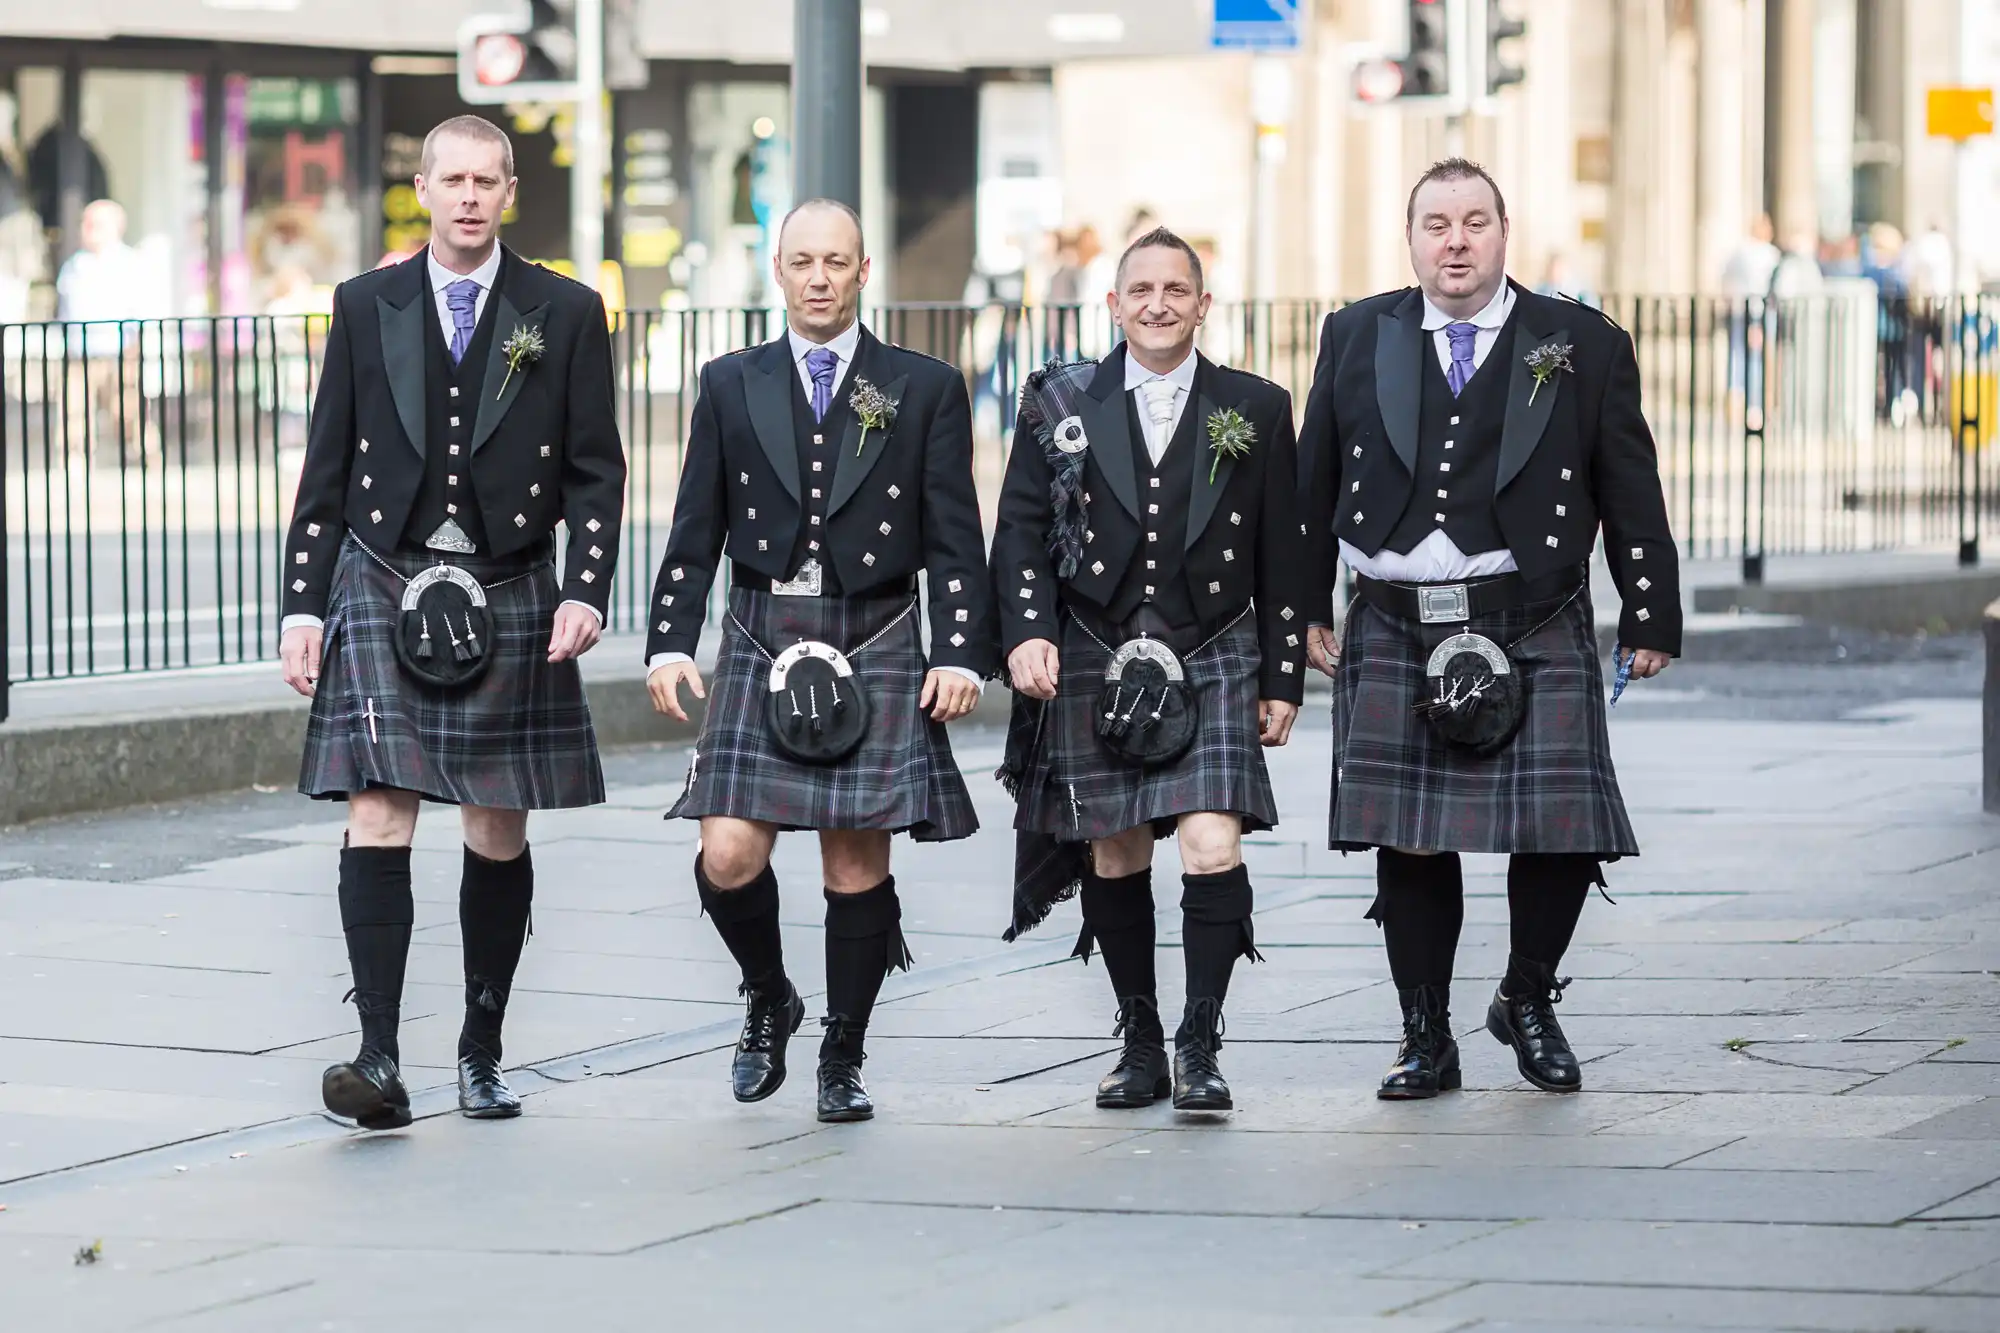 Four men dressed in traditional scottish kilts with sporran, walking down a city street, likely headed to a formal event.